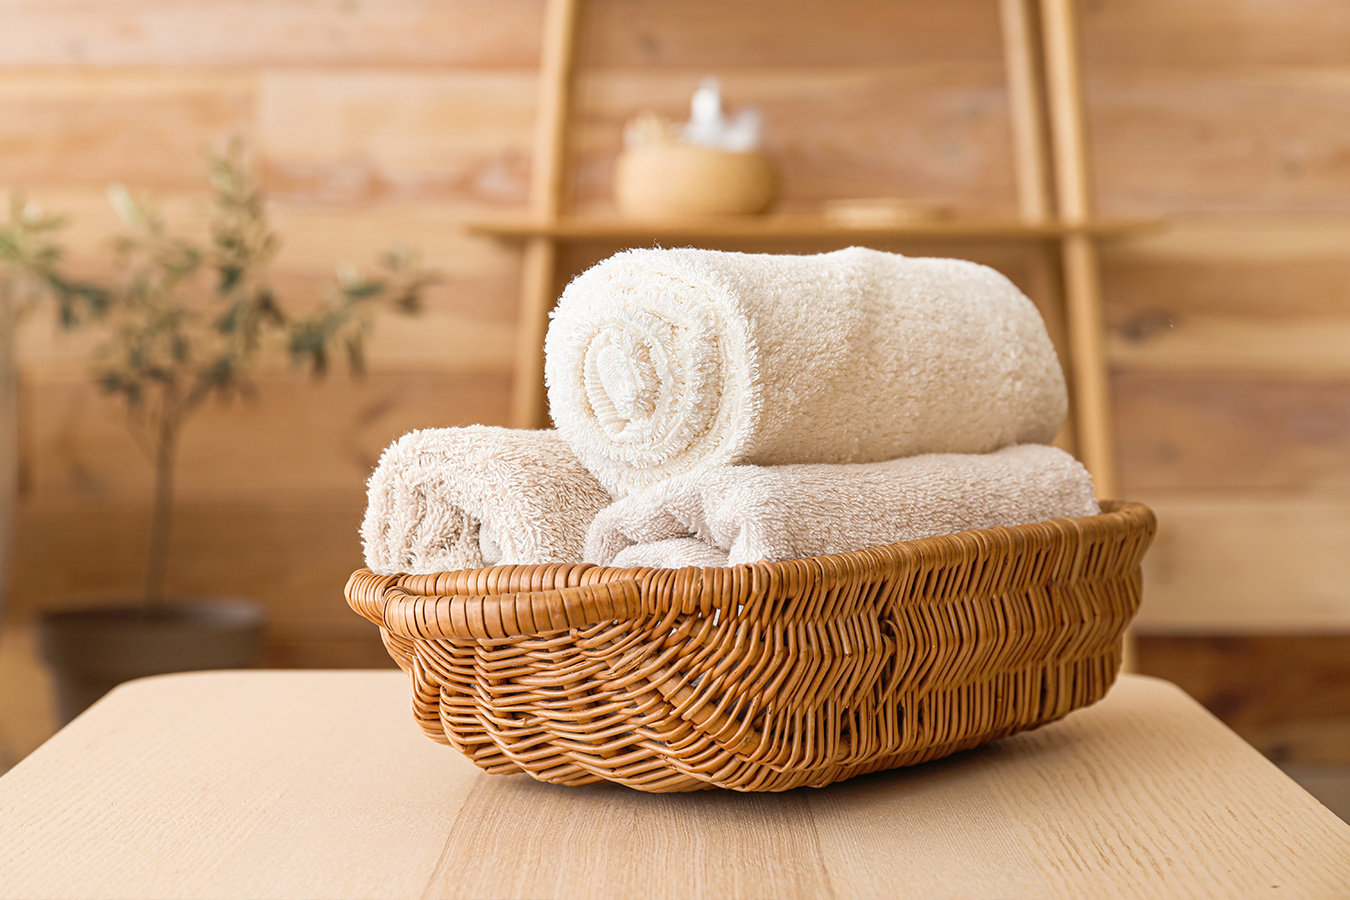 How to Roll Towels Like a Spa 